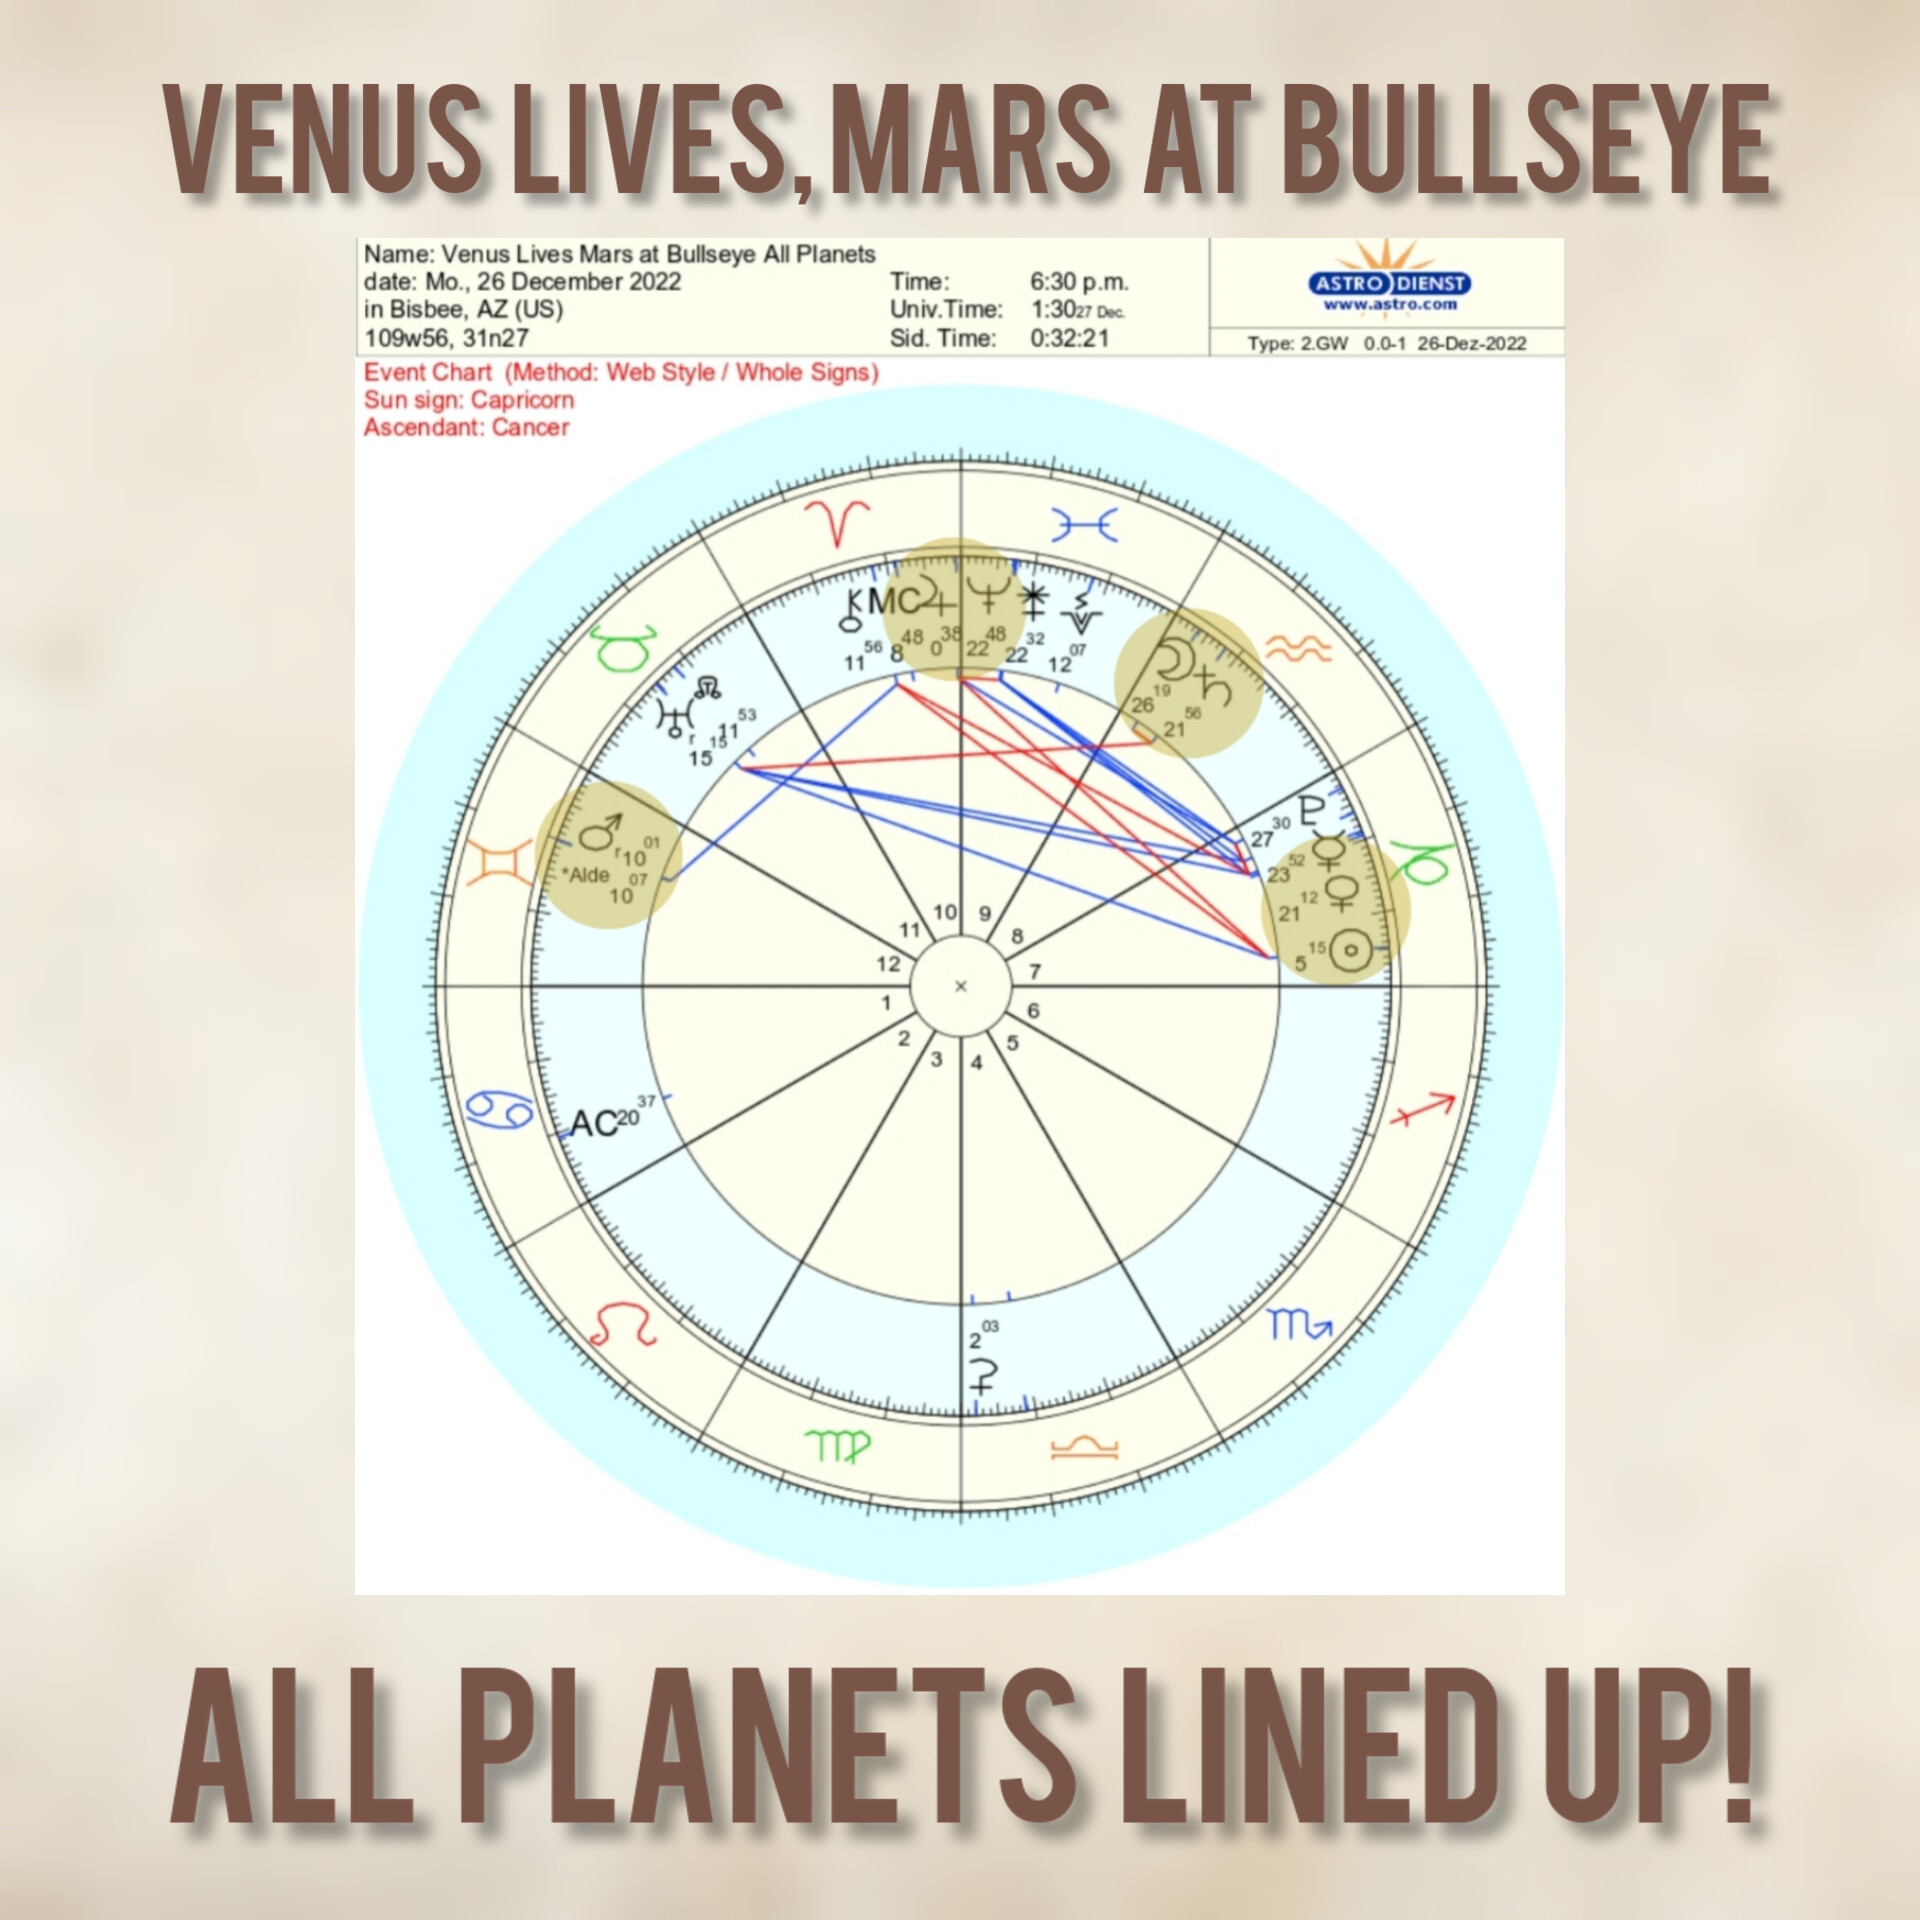 ALL PLANETS LINED UP